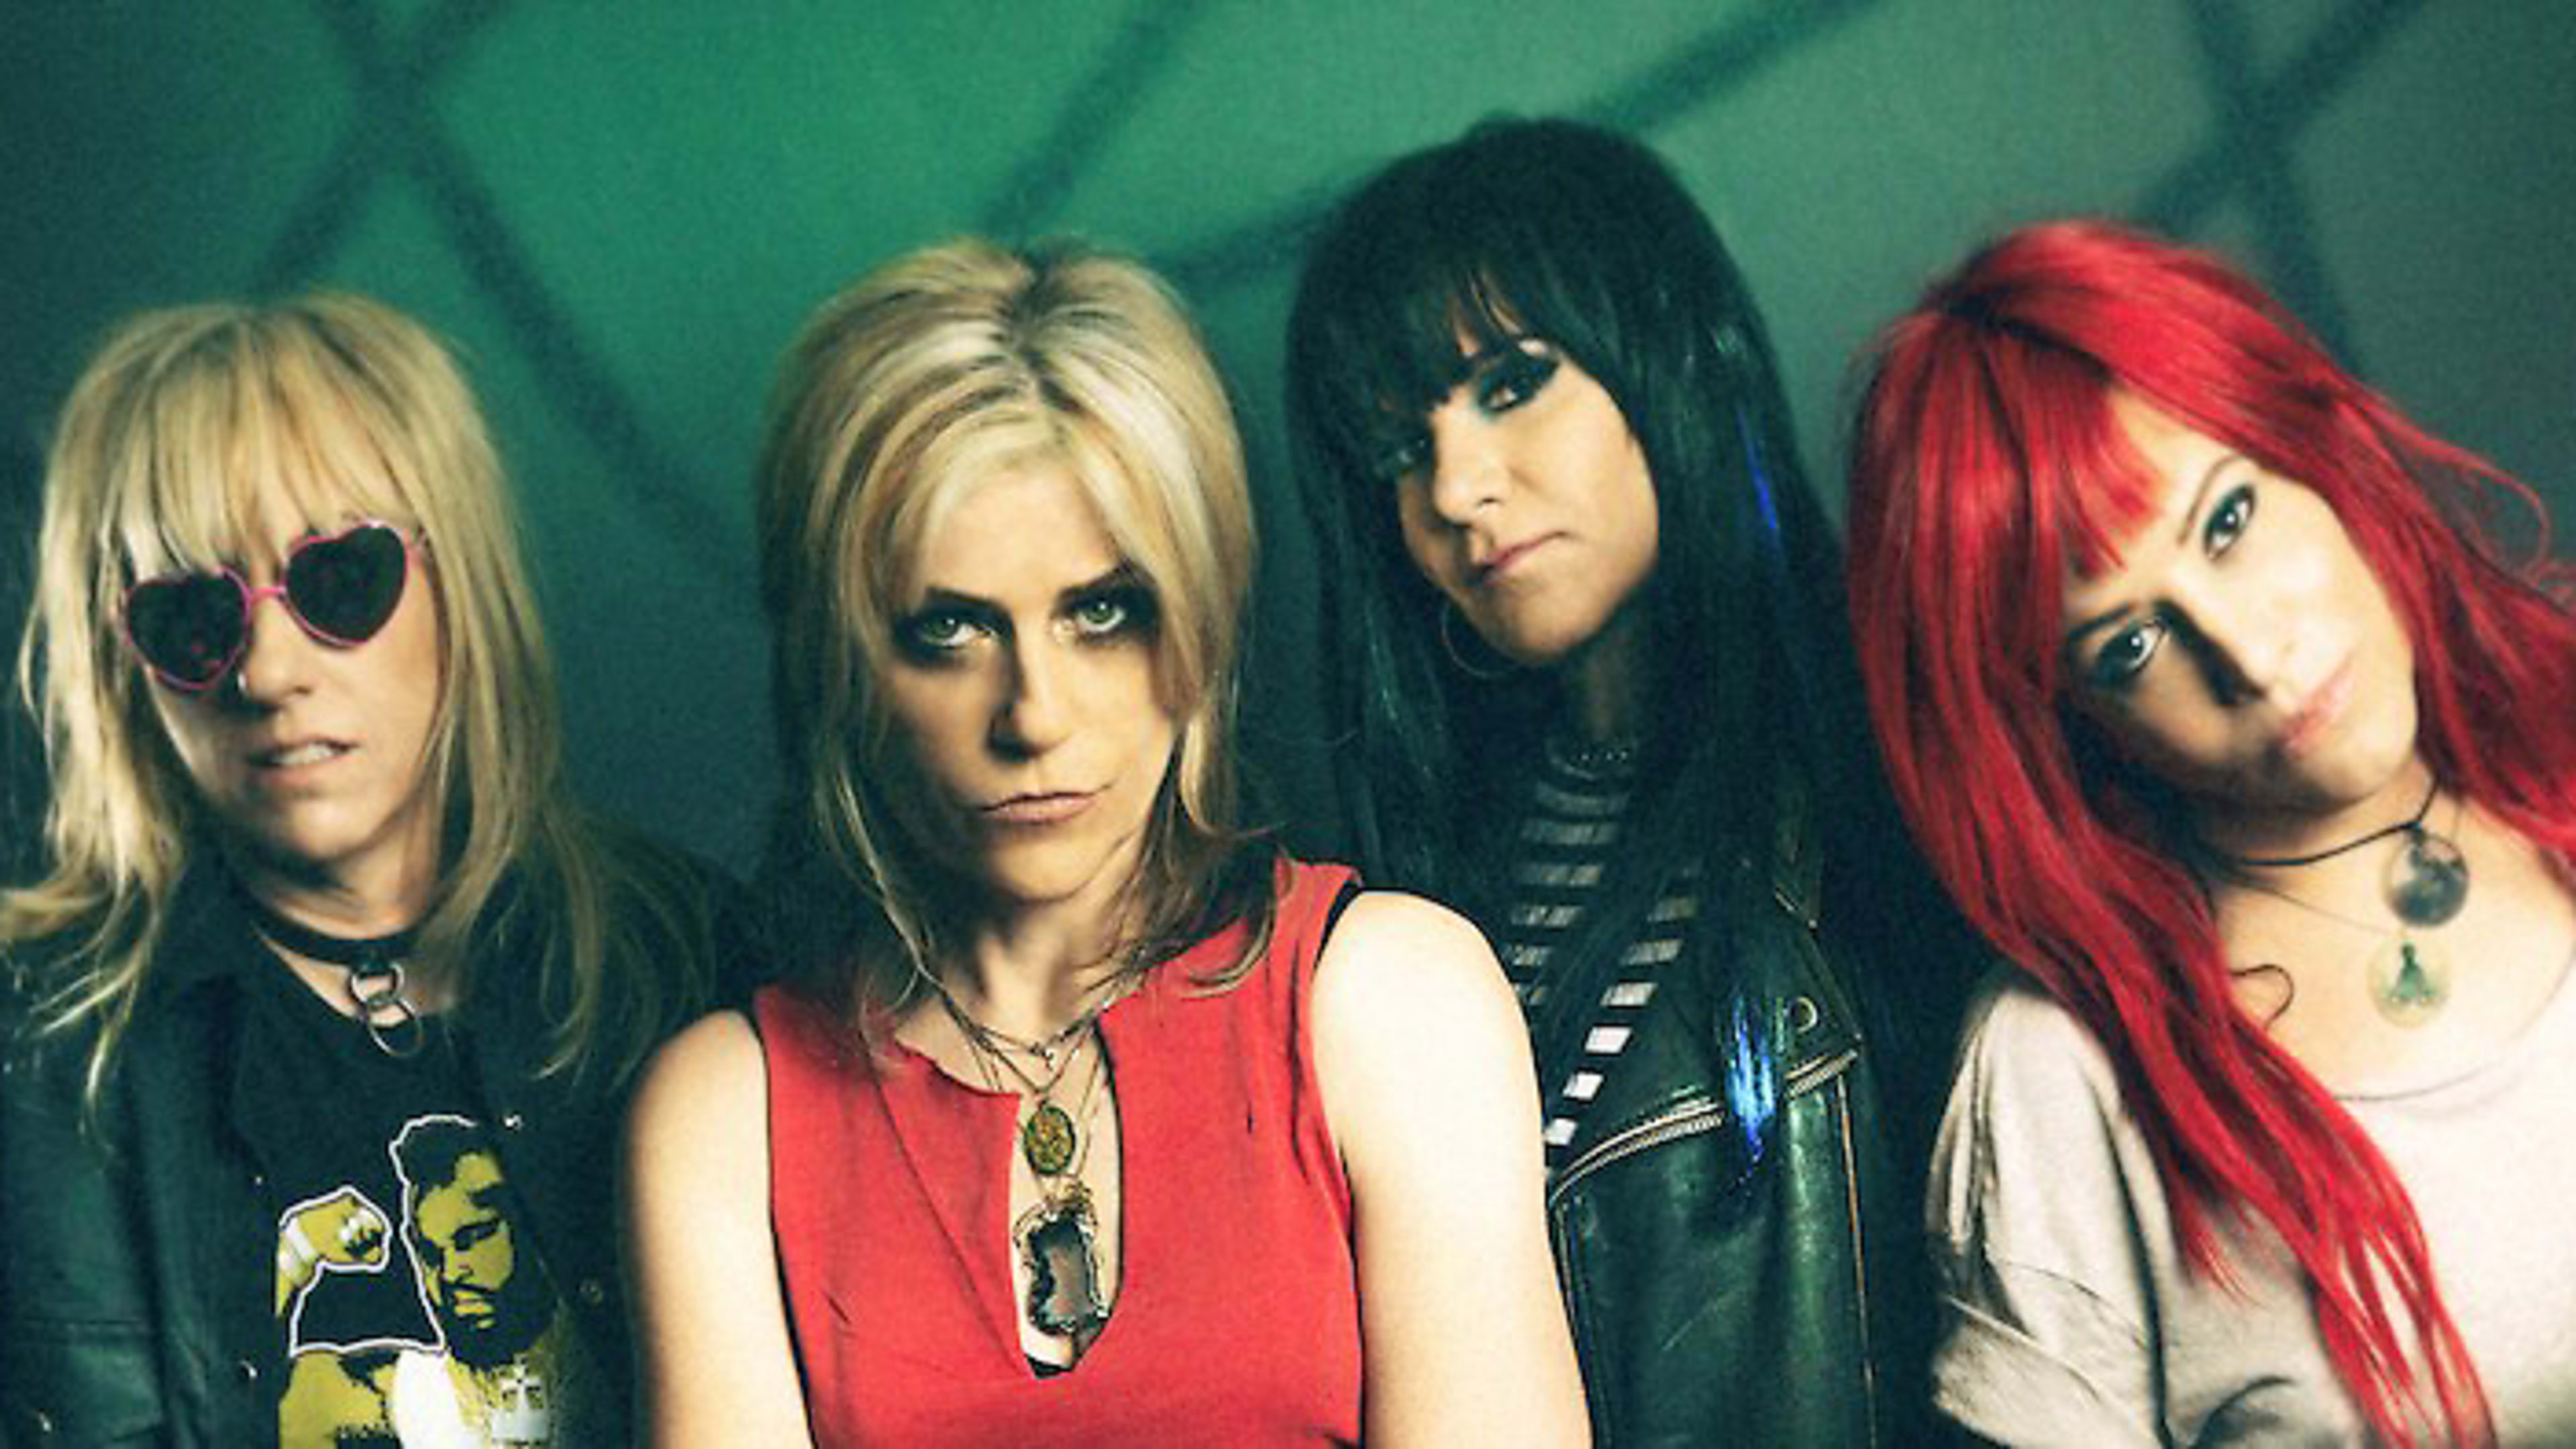 L7’s Anti-Trump Anthem, “Dispatch From Mar-A-Lago”: The Week In Music